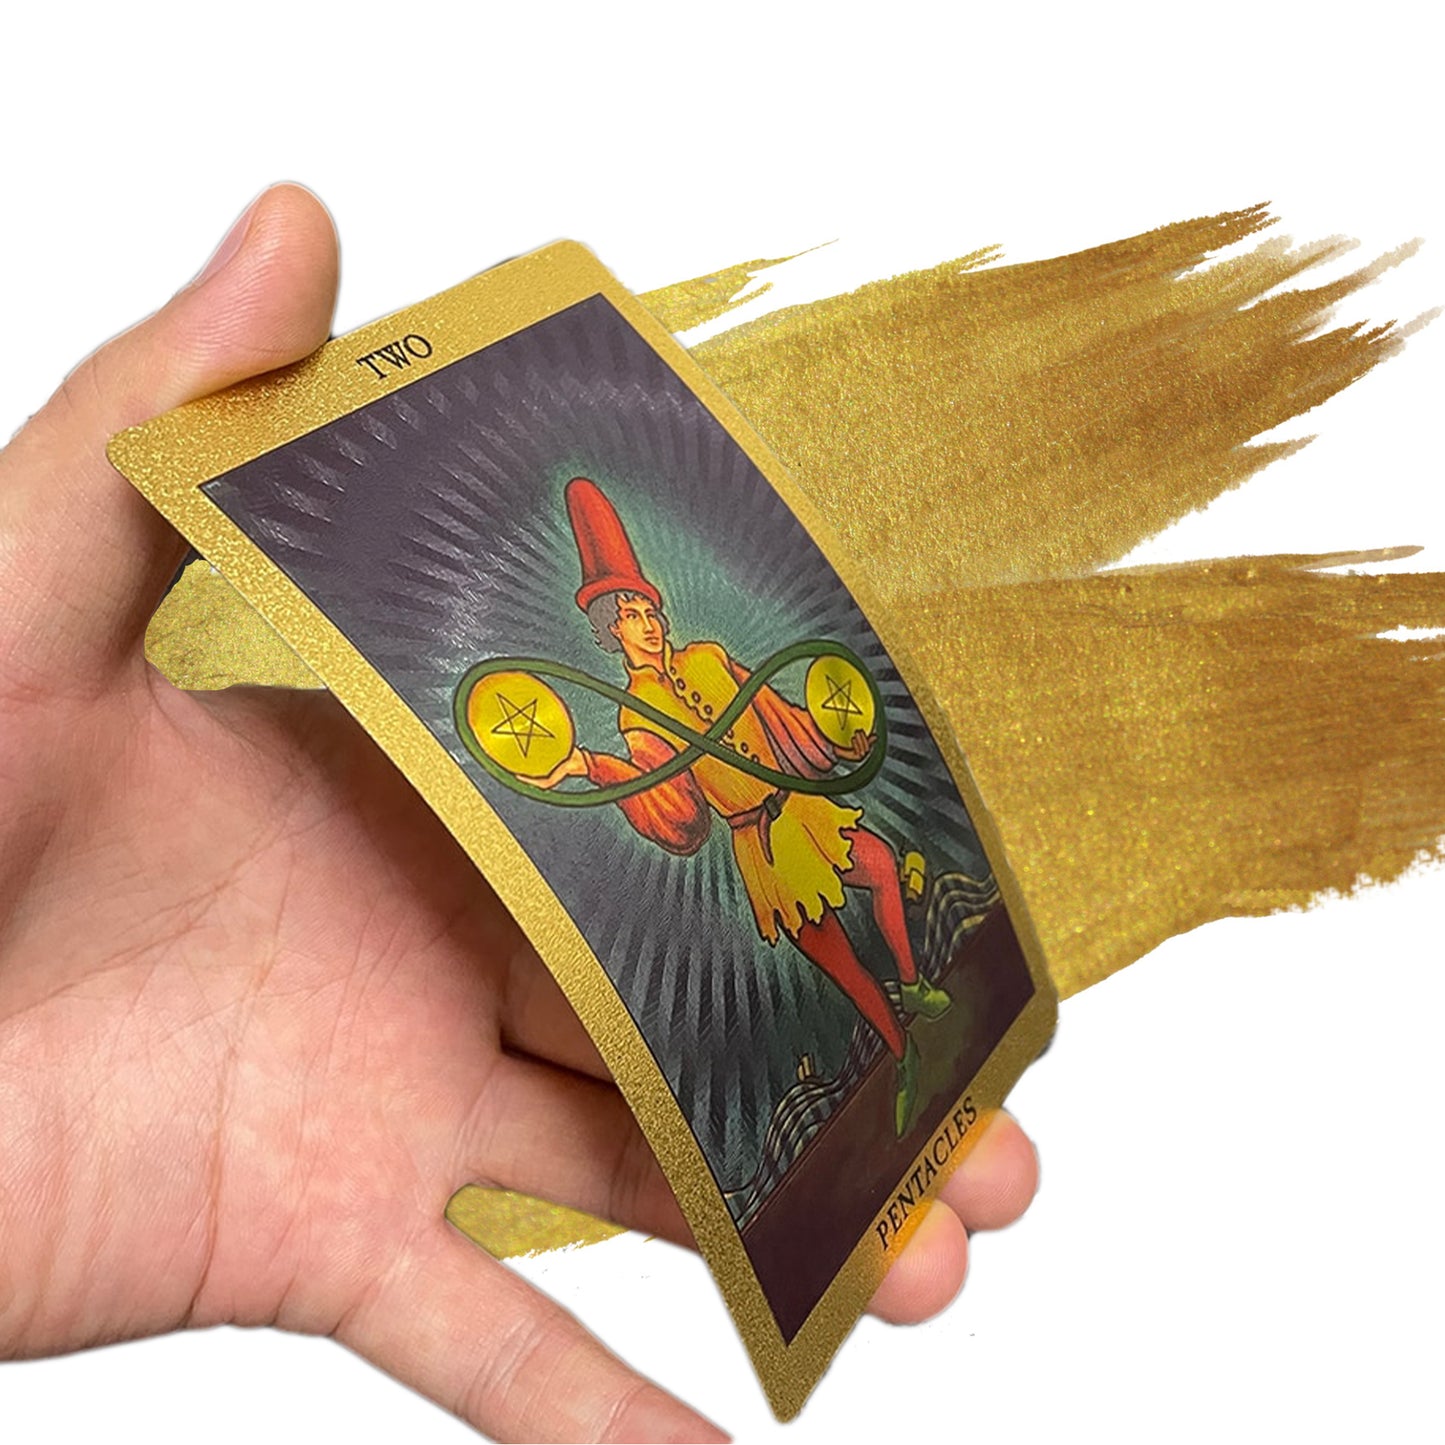 Gold Foil Tarot Cards Deck In Economic Tuck Box With Colored English Guidebook For Beginners | RWS-Inspired Premium Plastic Card Divination Gift Set | Apollo Tarot Shop